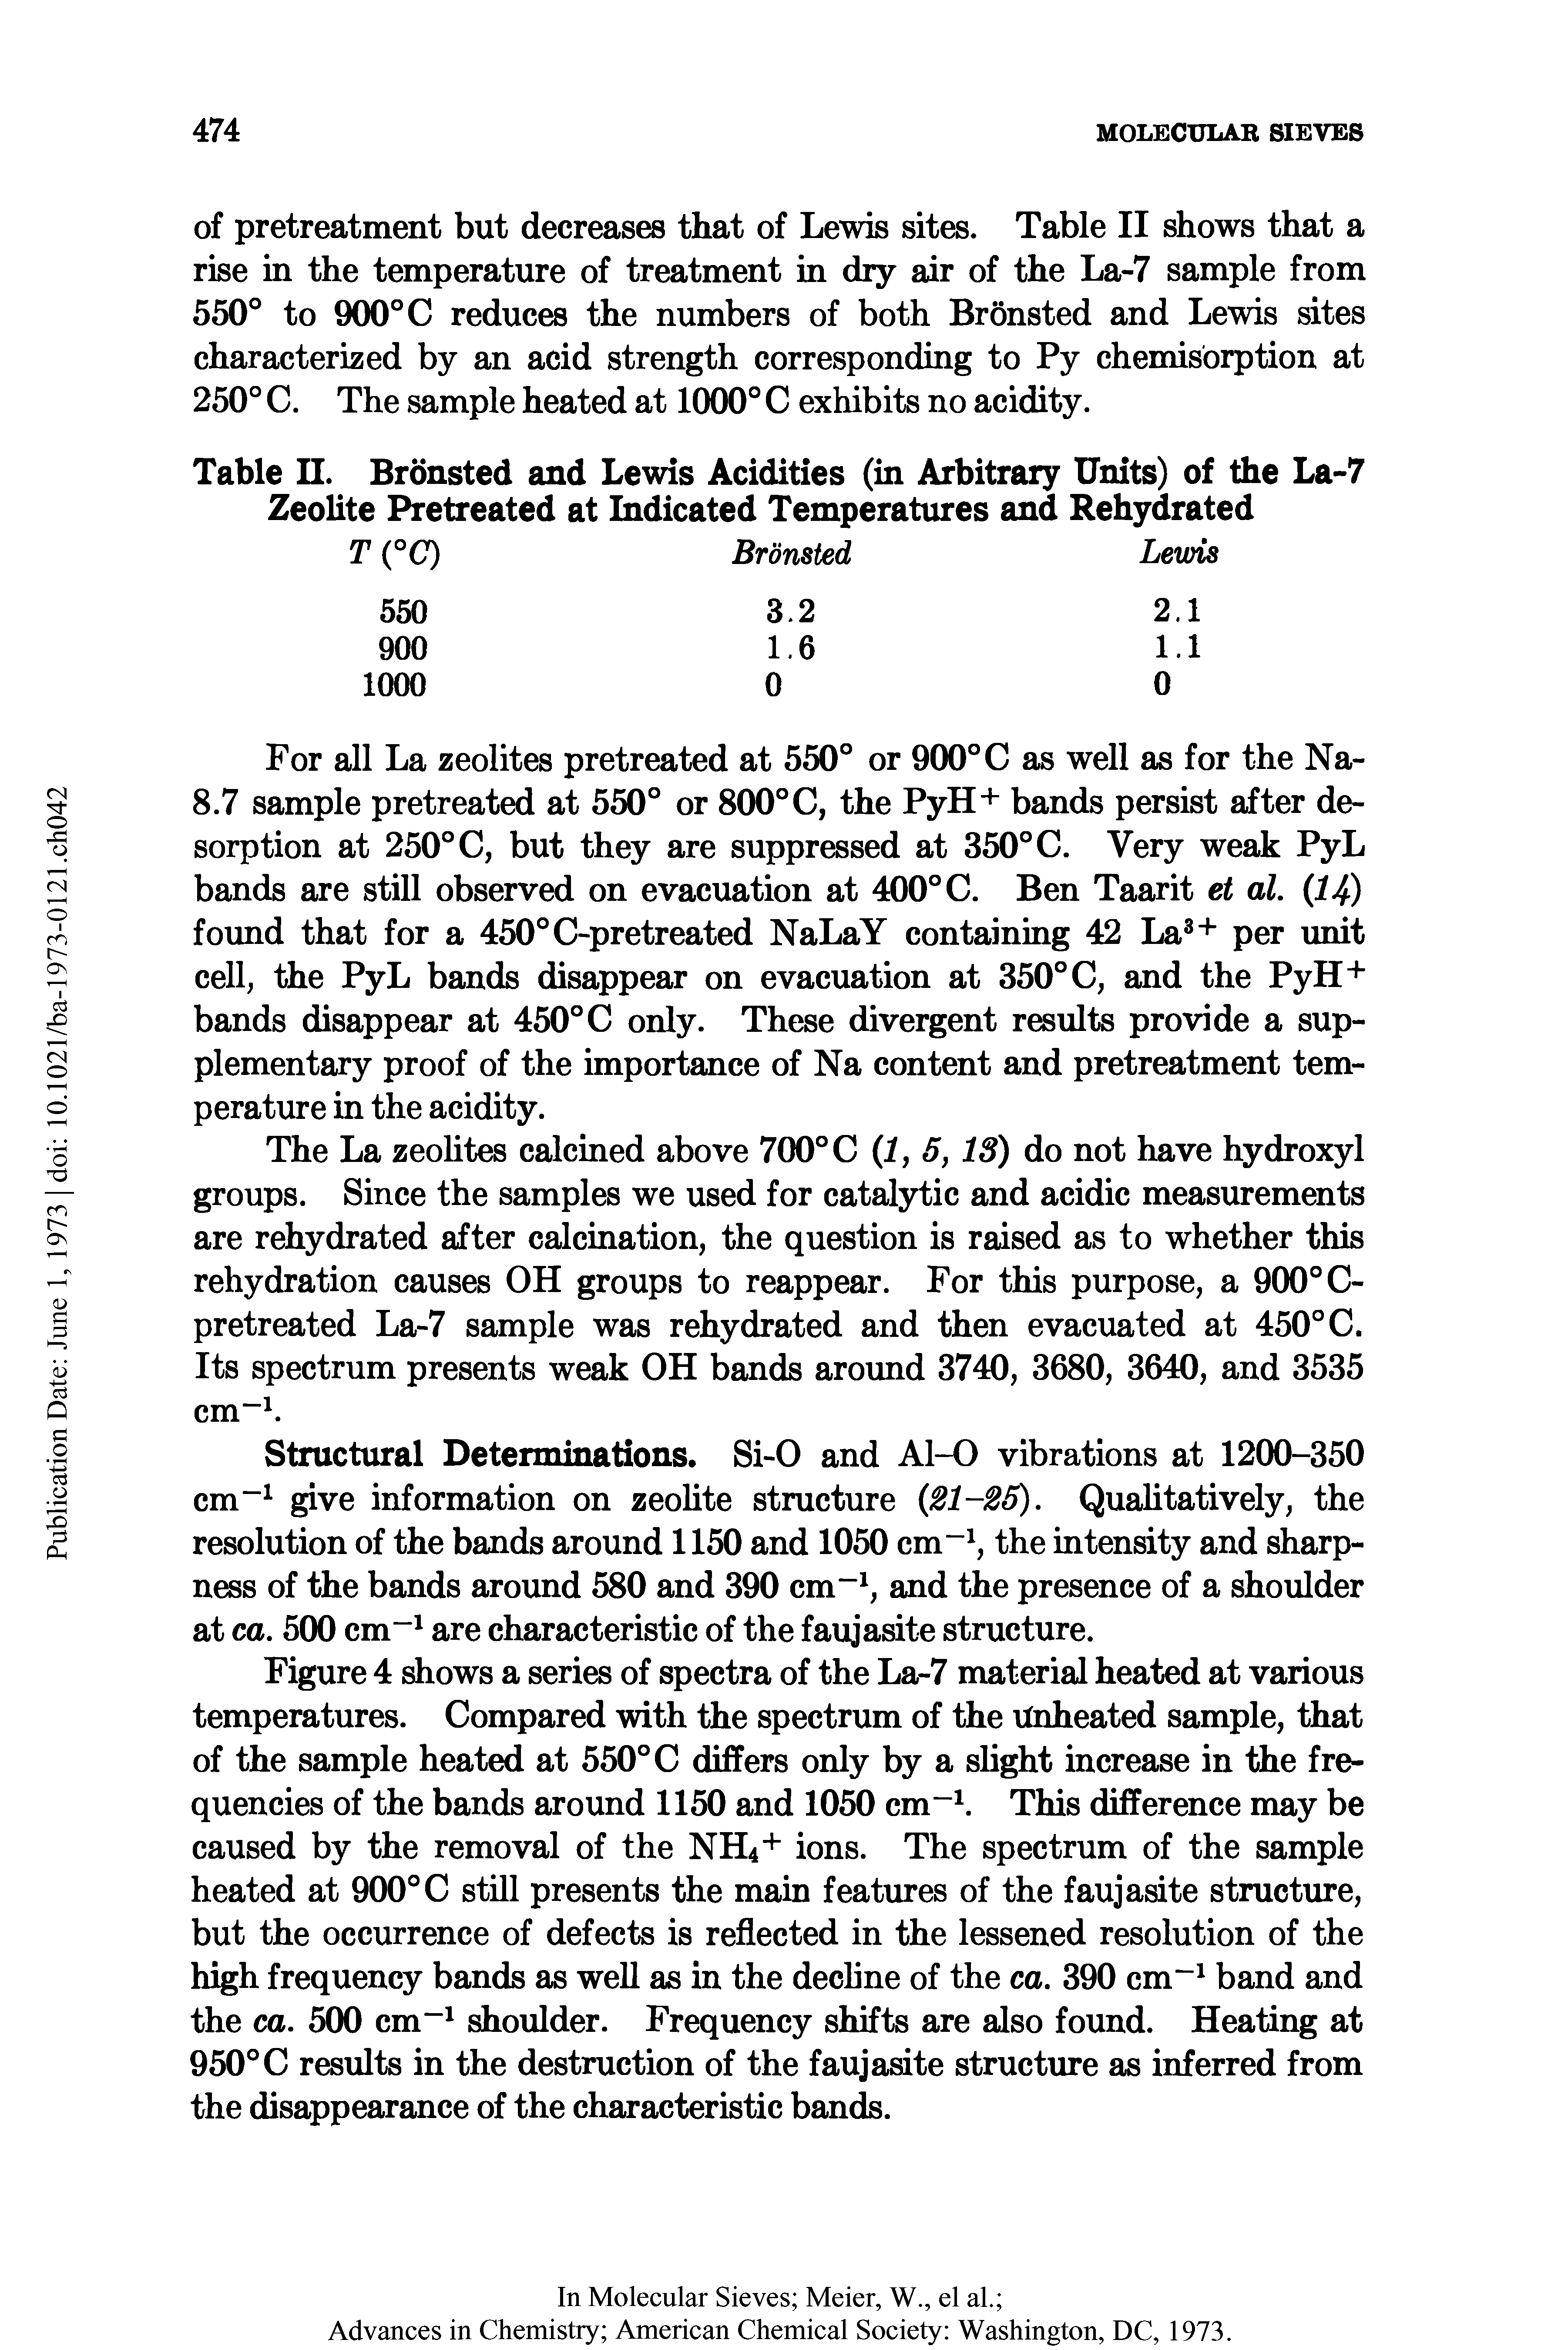 Table II. Bronsted and Lewis Acidities (in Arbitrary Units) of the La-7 Zeolite Pretreated at Indicated Temperatures and Rehydrated...